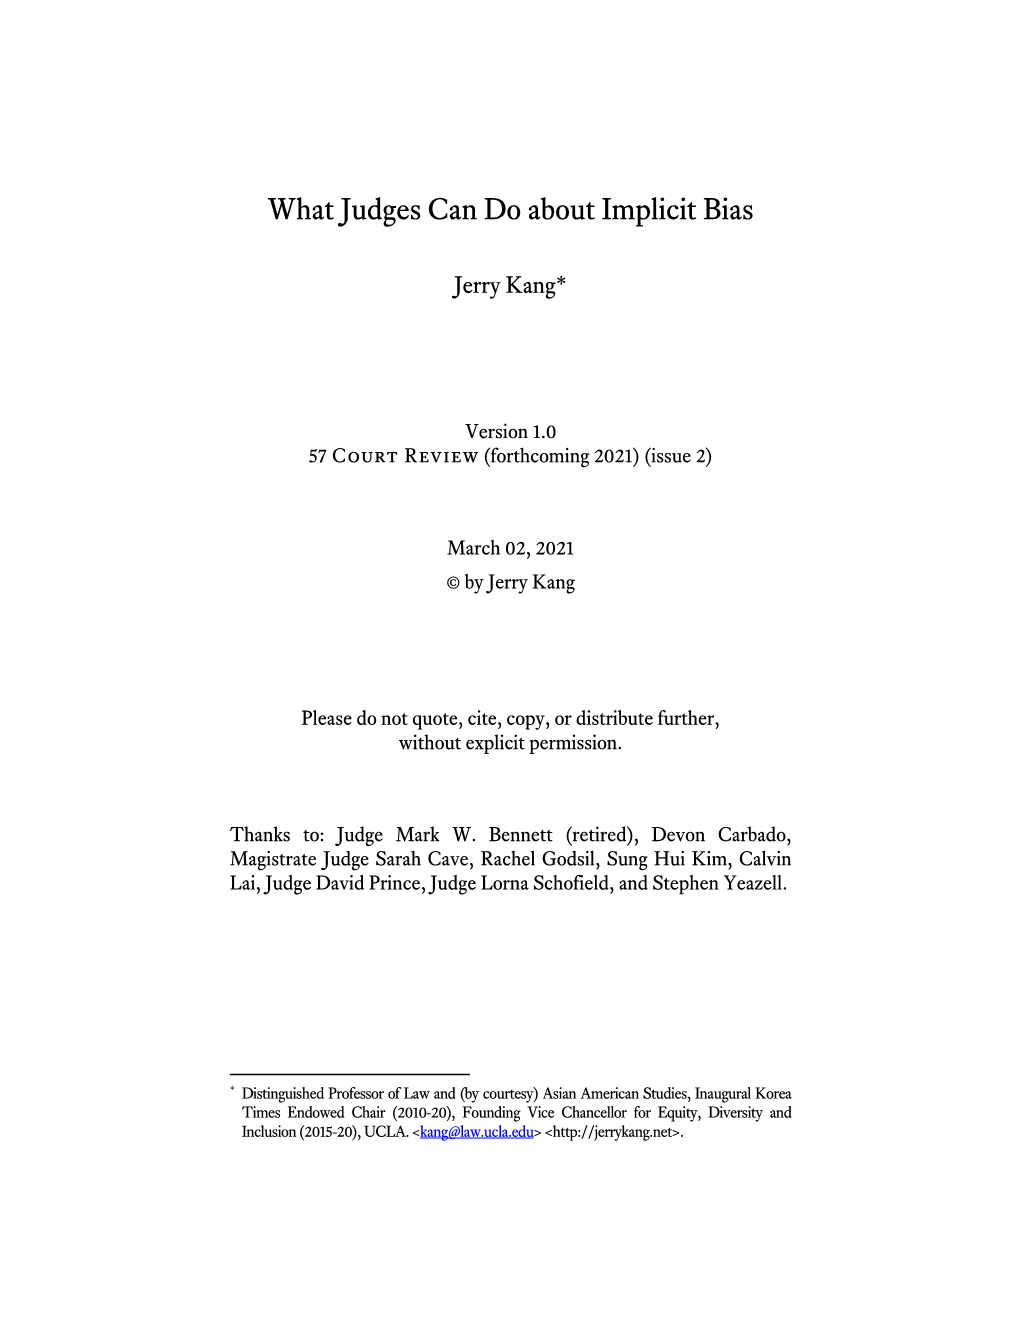 What Judges Can Do About Implicit Bias